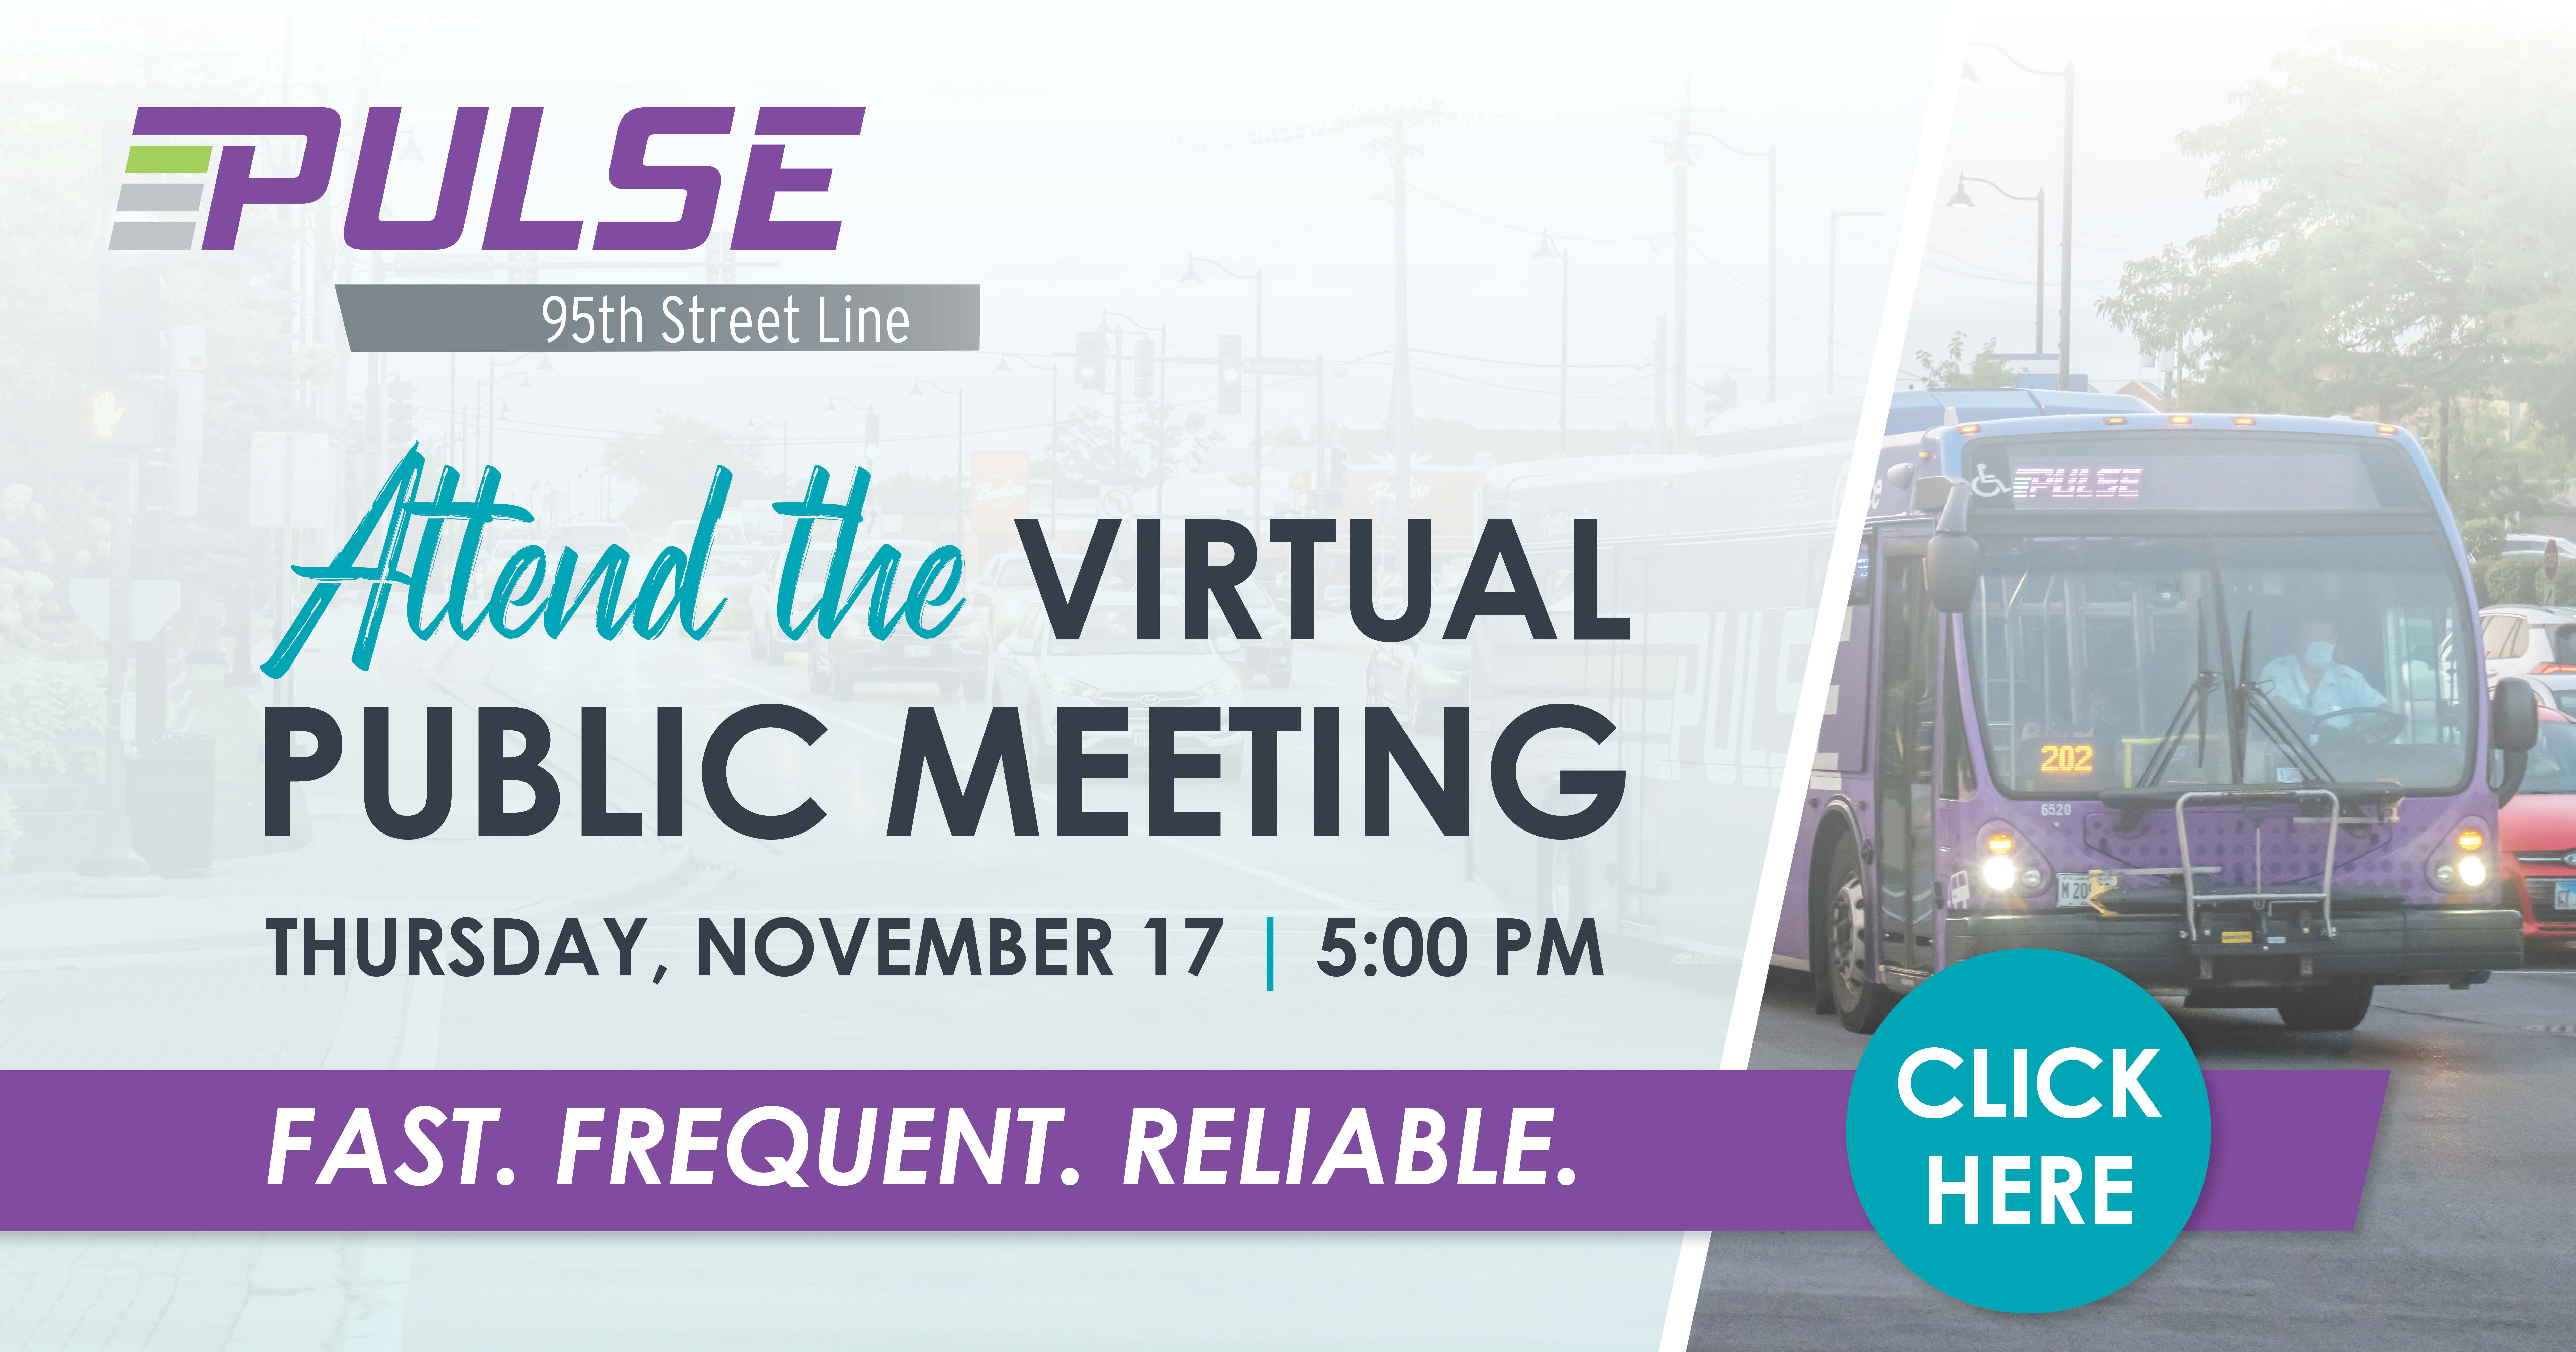 An invitation to attend the Pulse 95th St. Public Meeting on November 17, 2022, at 5pm.